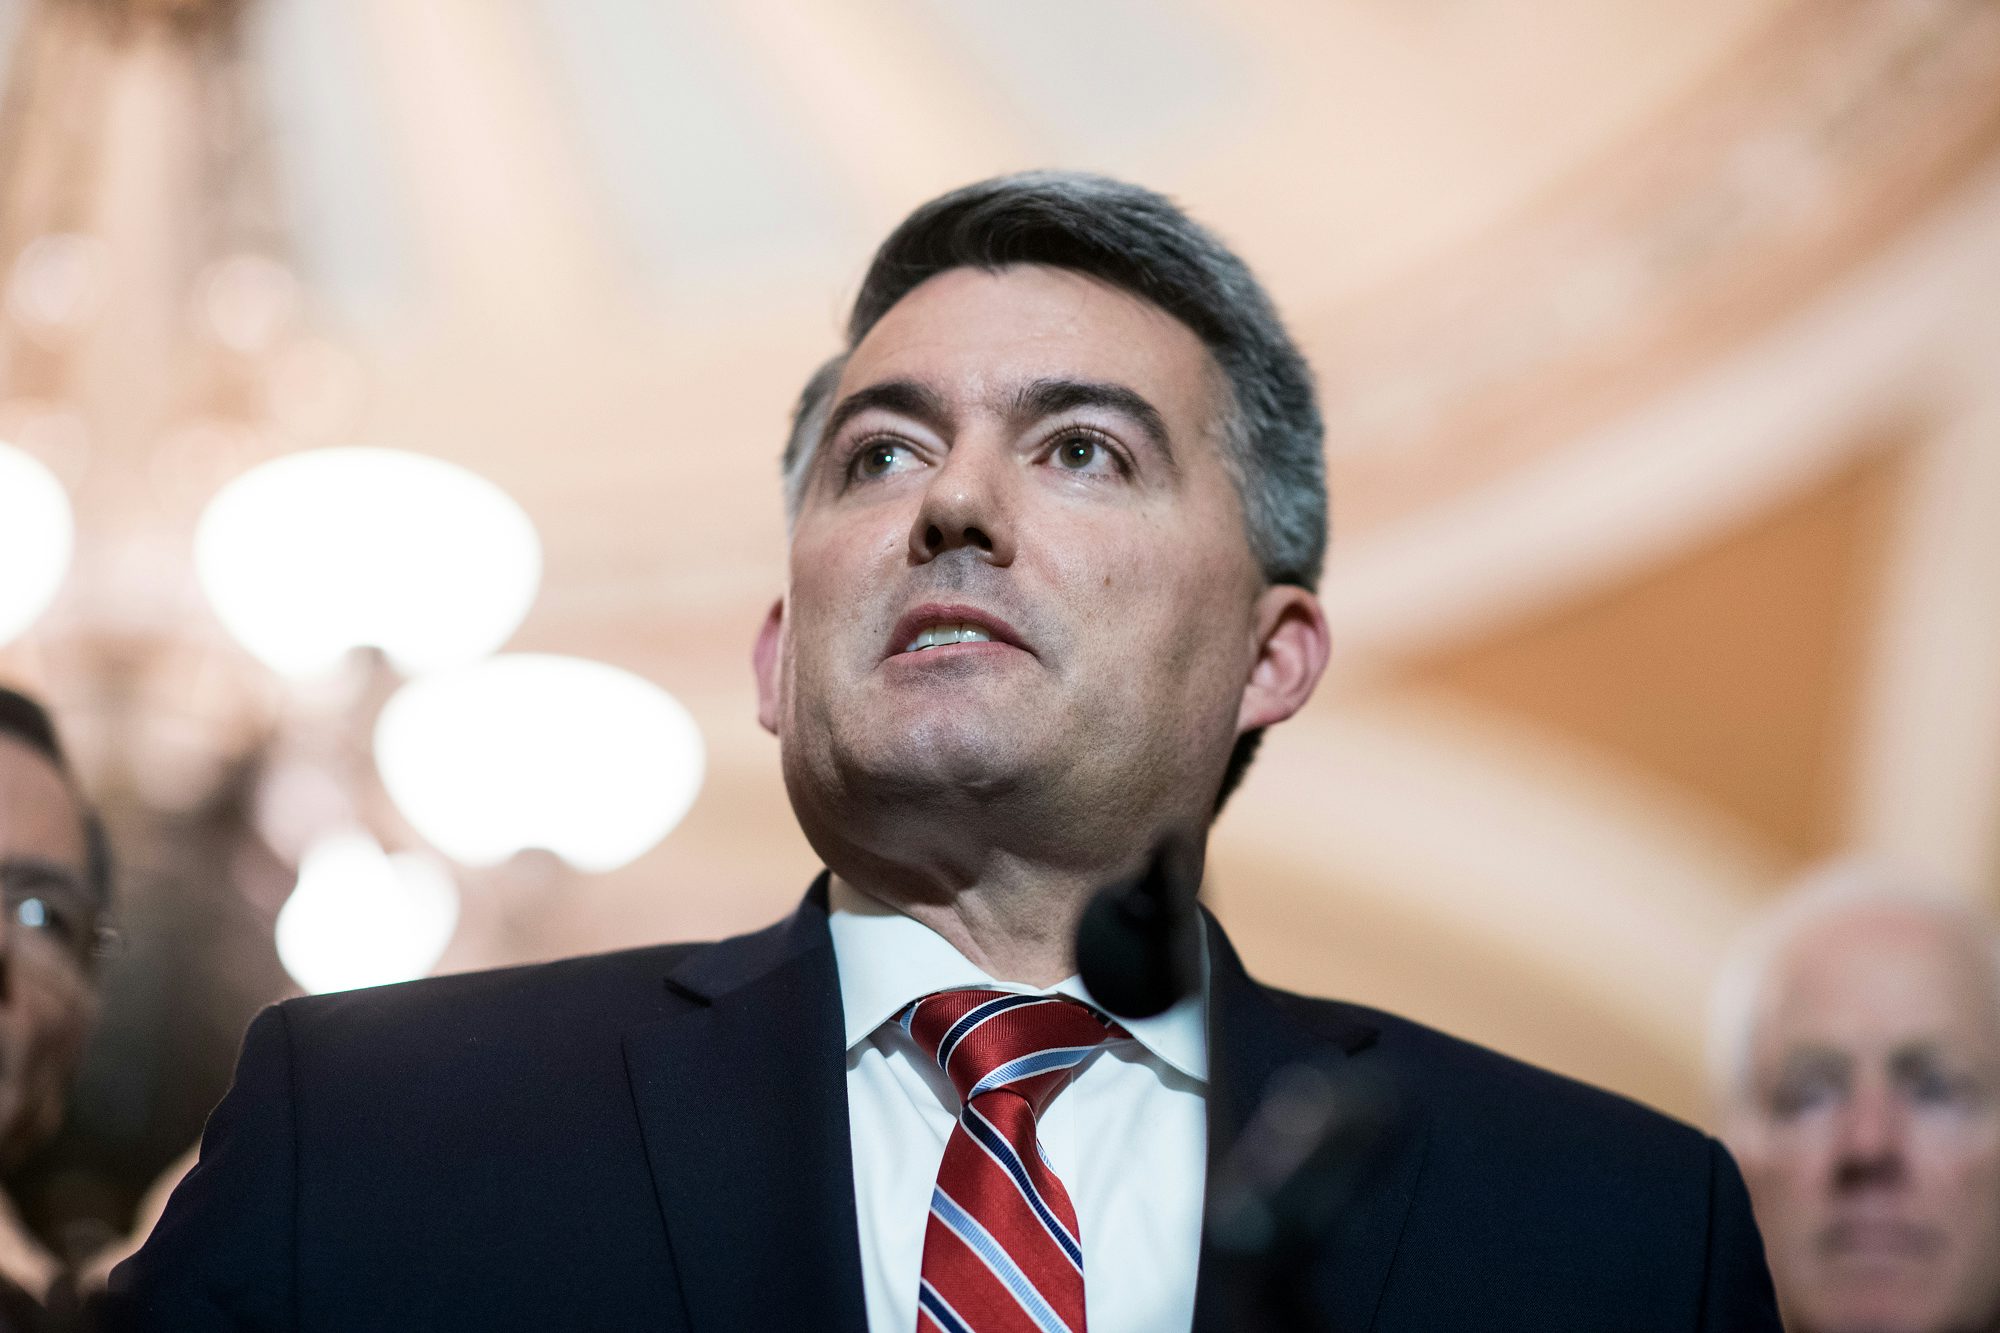 CoryGardner Trump just promised to support a bill giving states the right to legalize cannabis